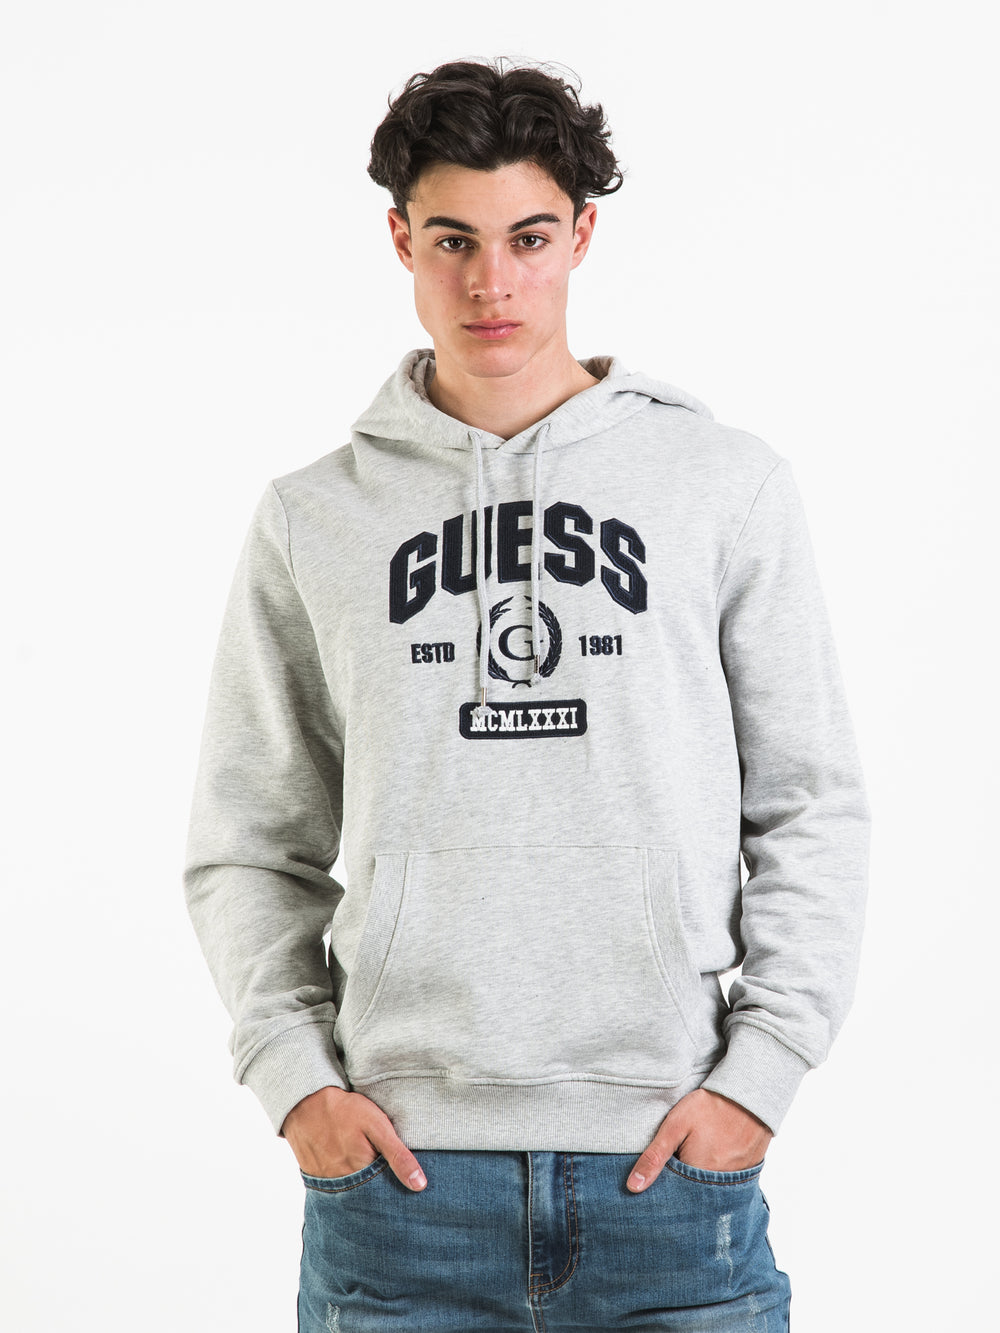 GUESS ORGANIC FRENCH TERRY COTTON COLLEGIATE PULL OVER HOODIE - CLEARANCE